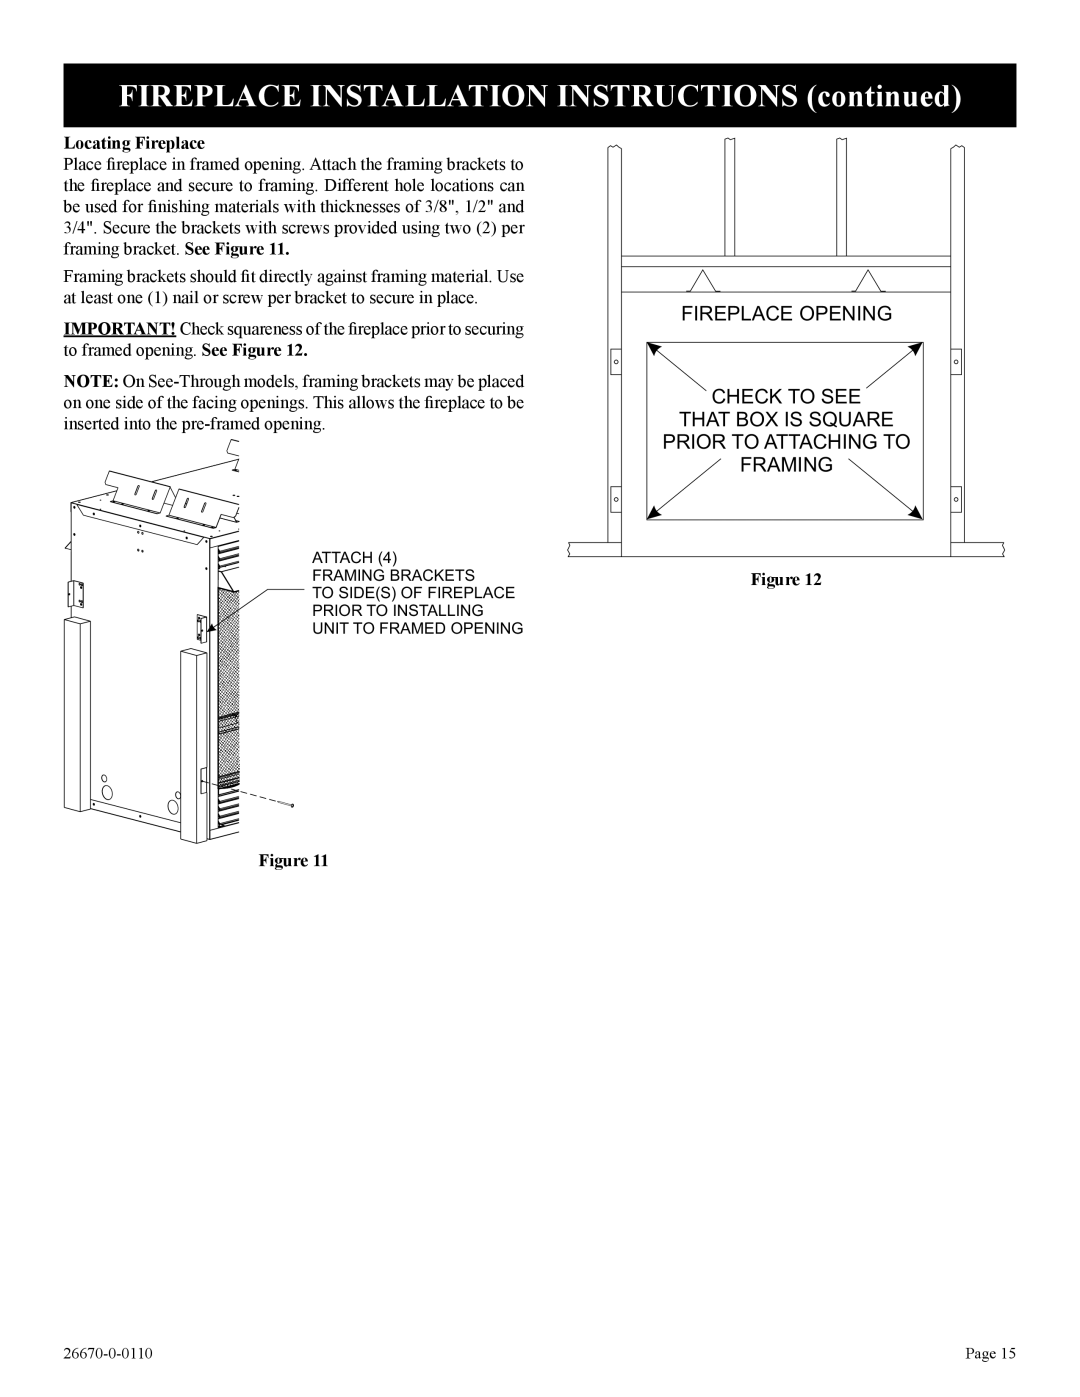 Empire Comfort Systems VFP36PP32EP-2 FIREPLACE INSTALLATION INSTRUCTIONS continued, Prior To Attaching To Framing 